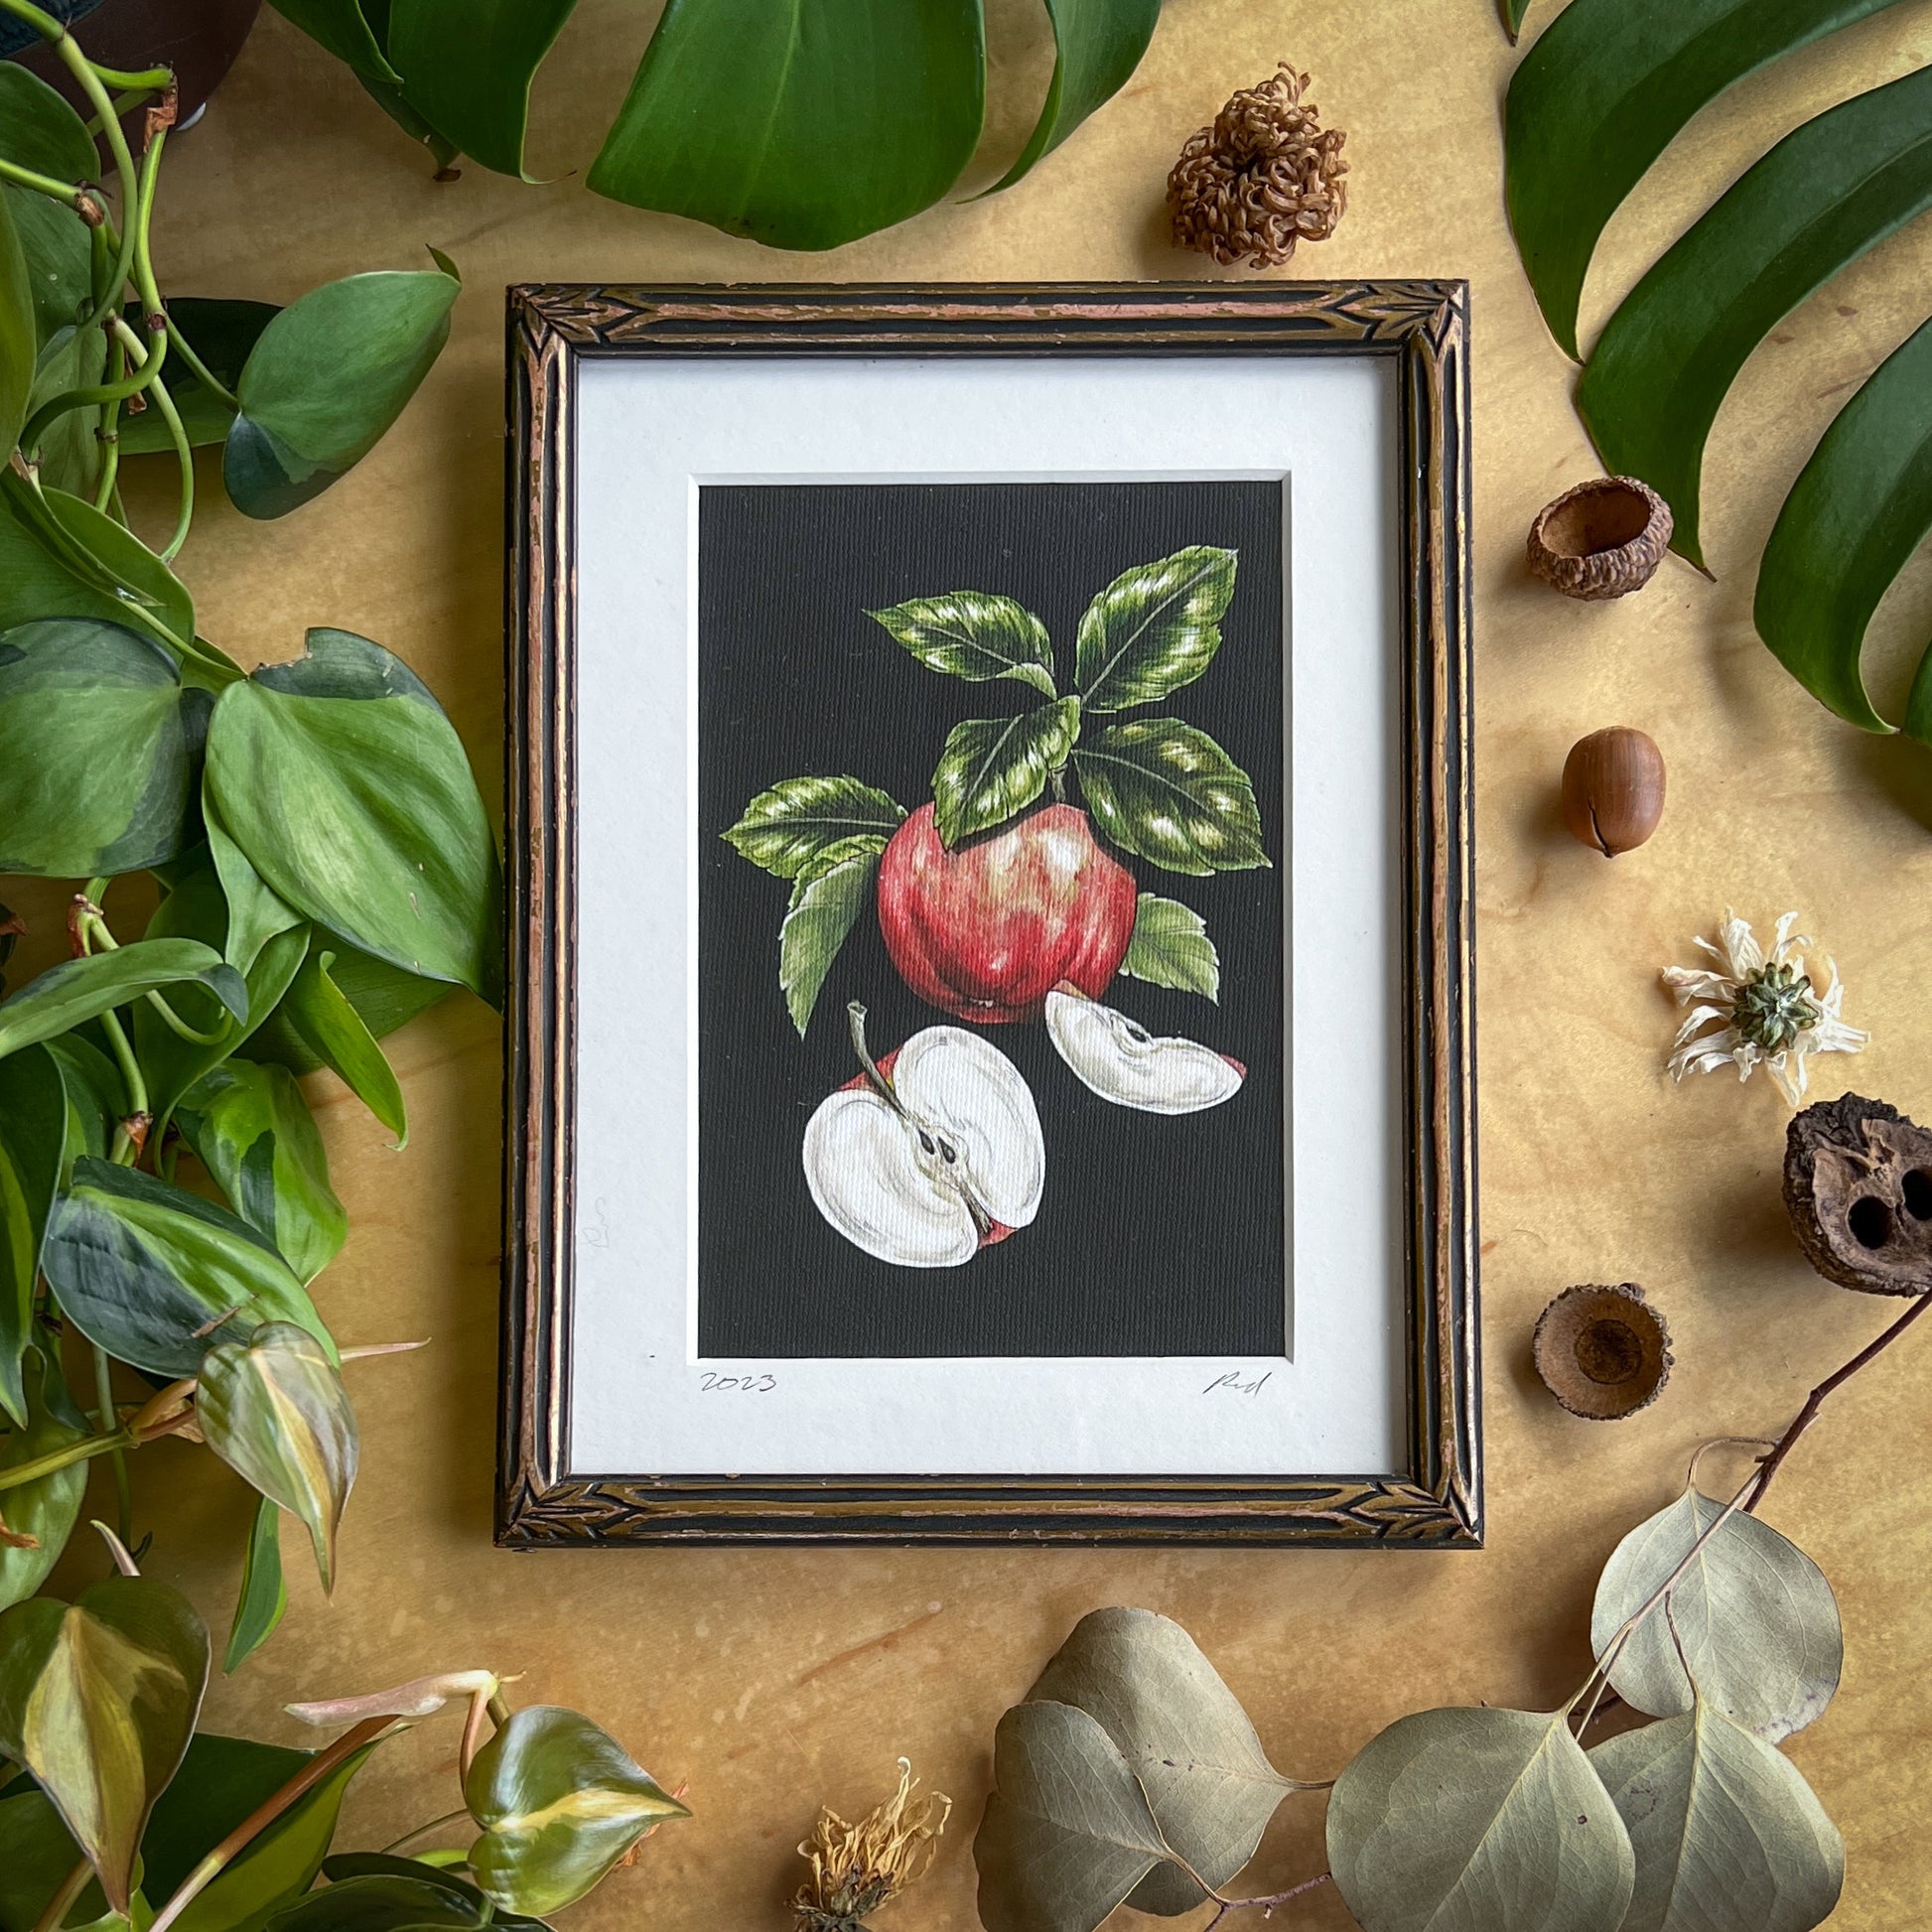 Canvas print of a honey crisp apple in a vintage gold and black frame displayed on a wood table with plants and other natural items scattered around it